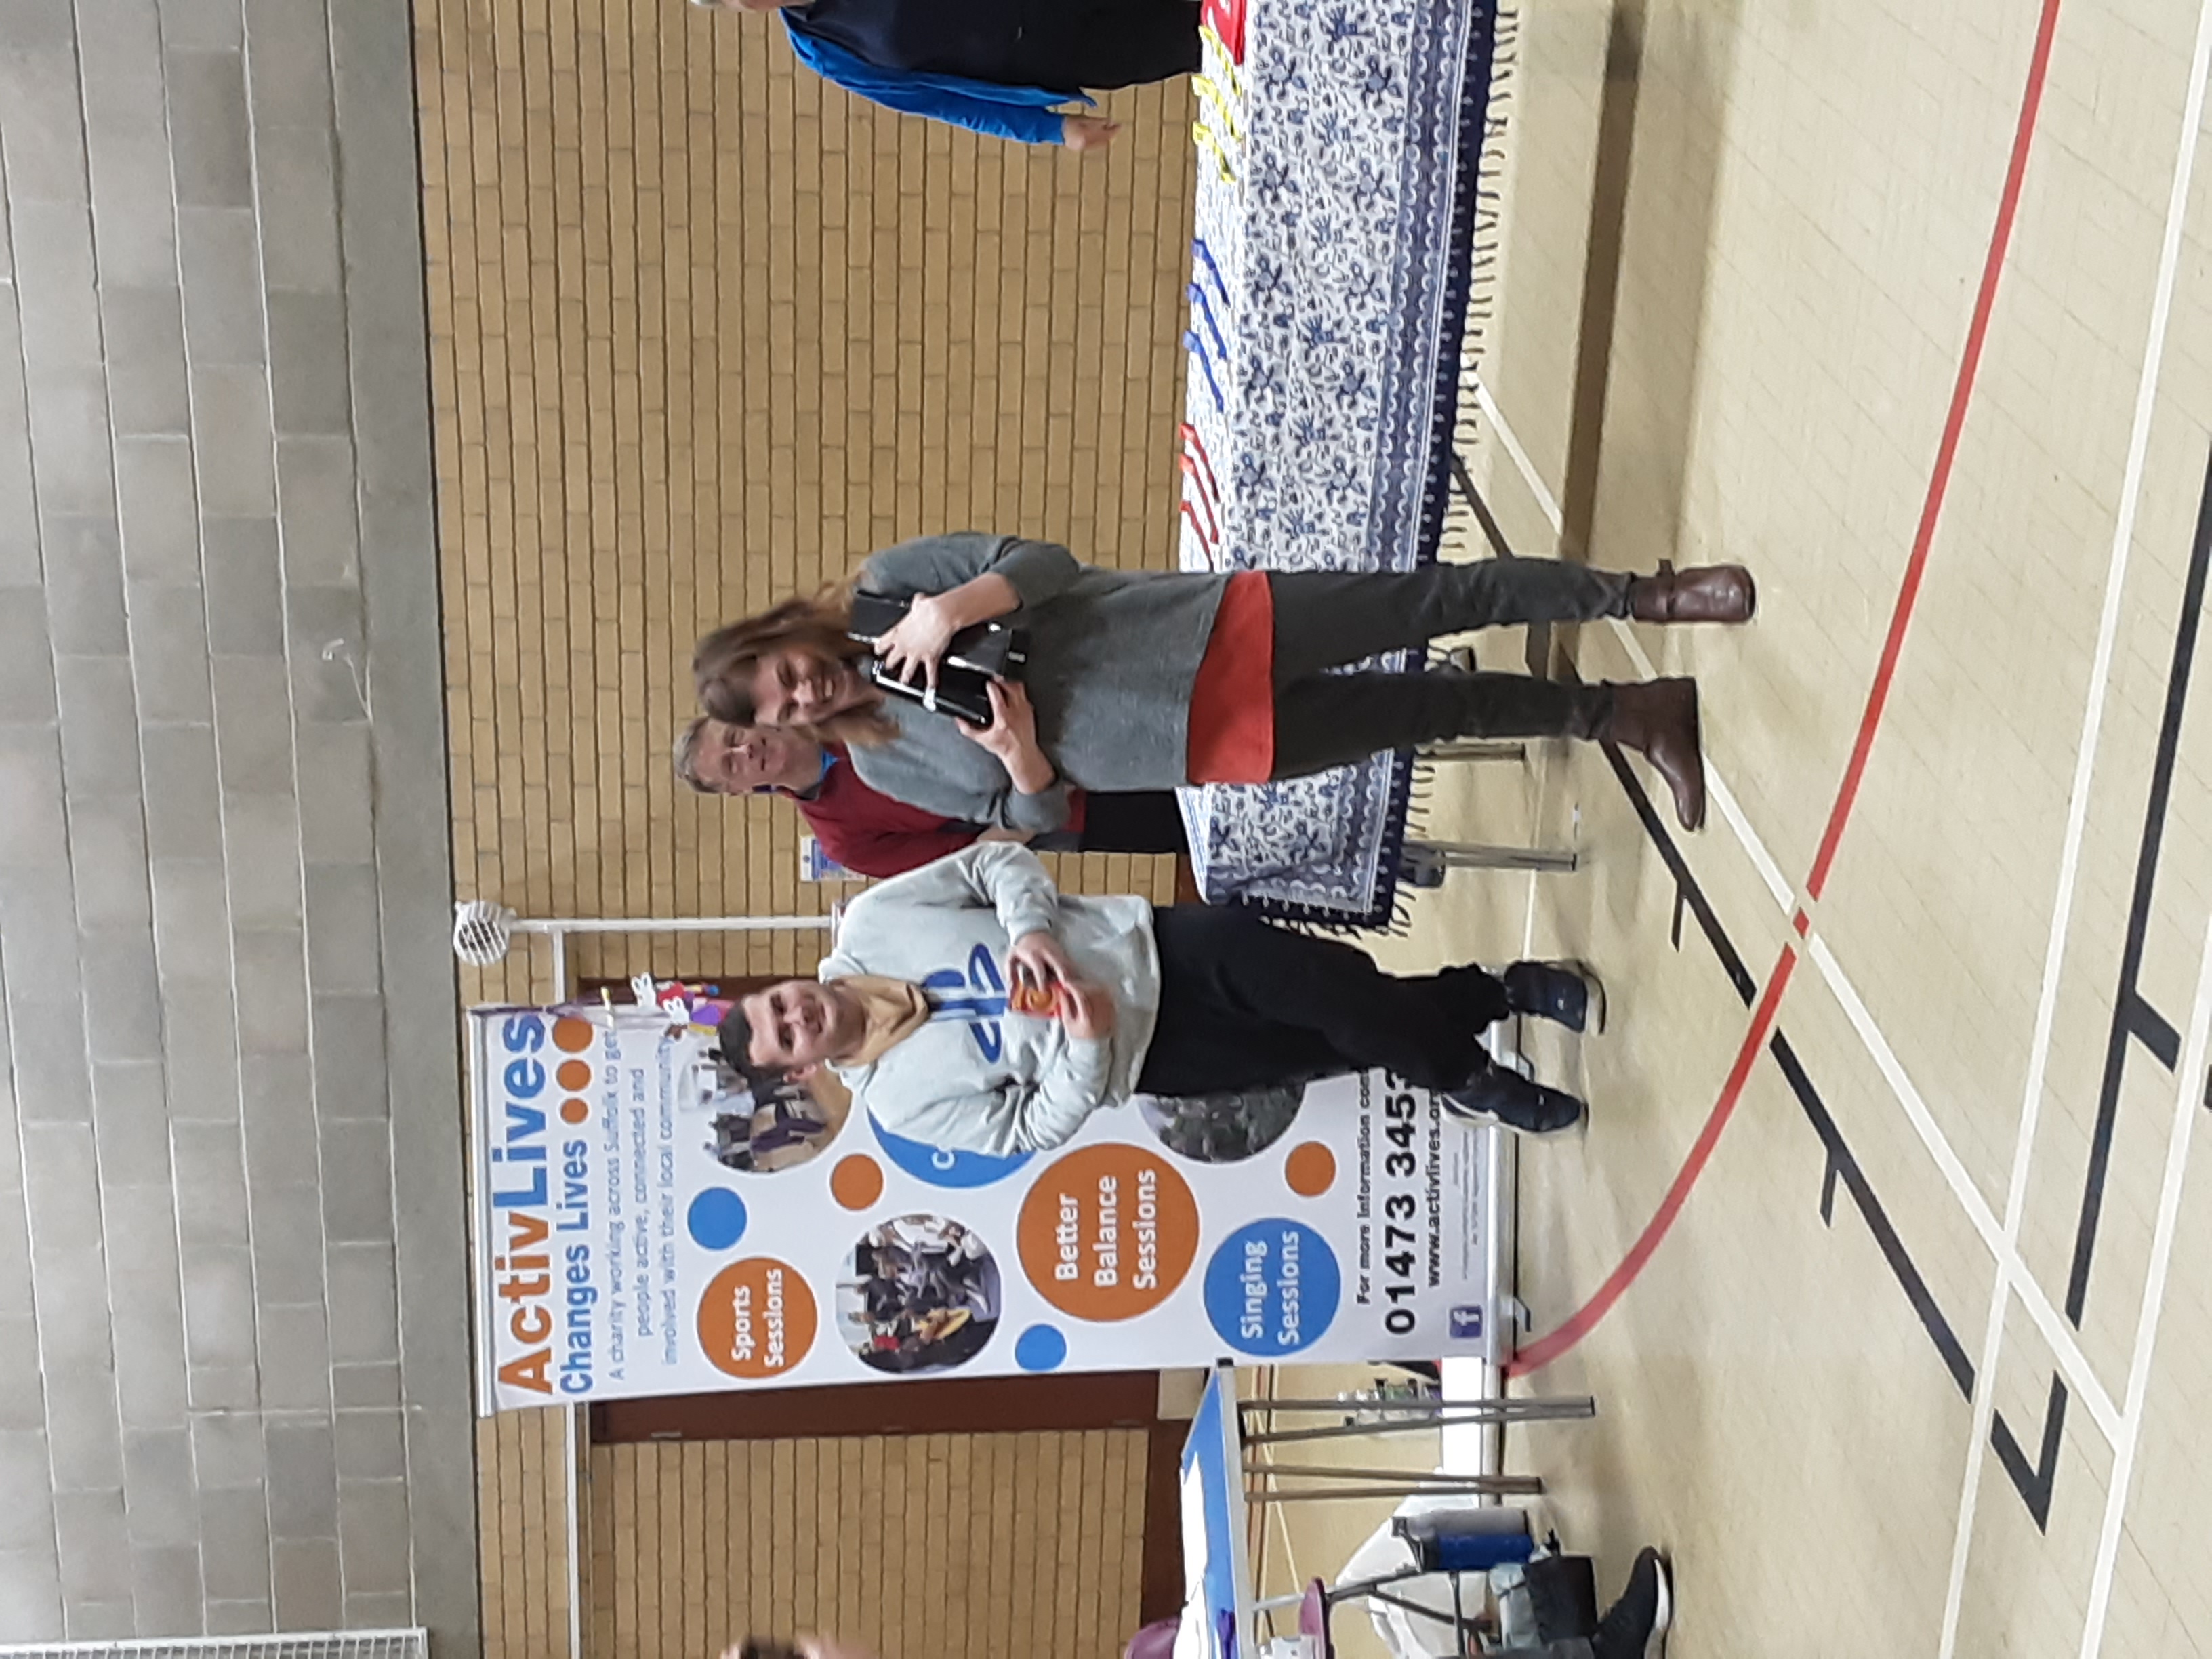 Customer collecting their prize at the Boccia Festival